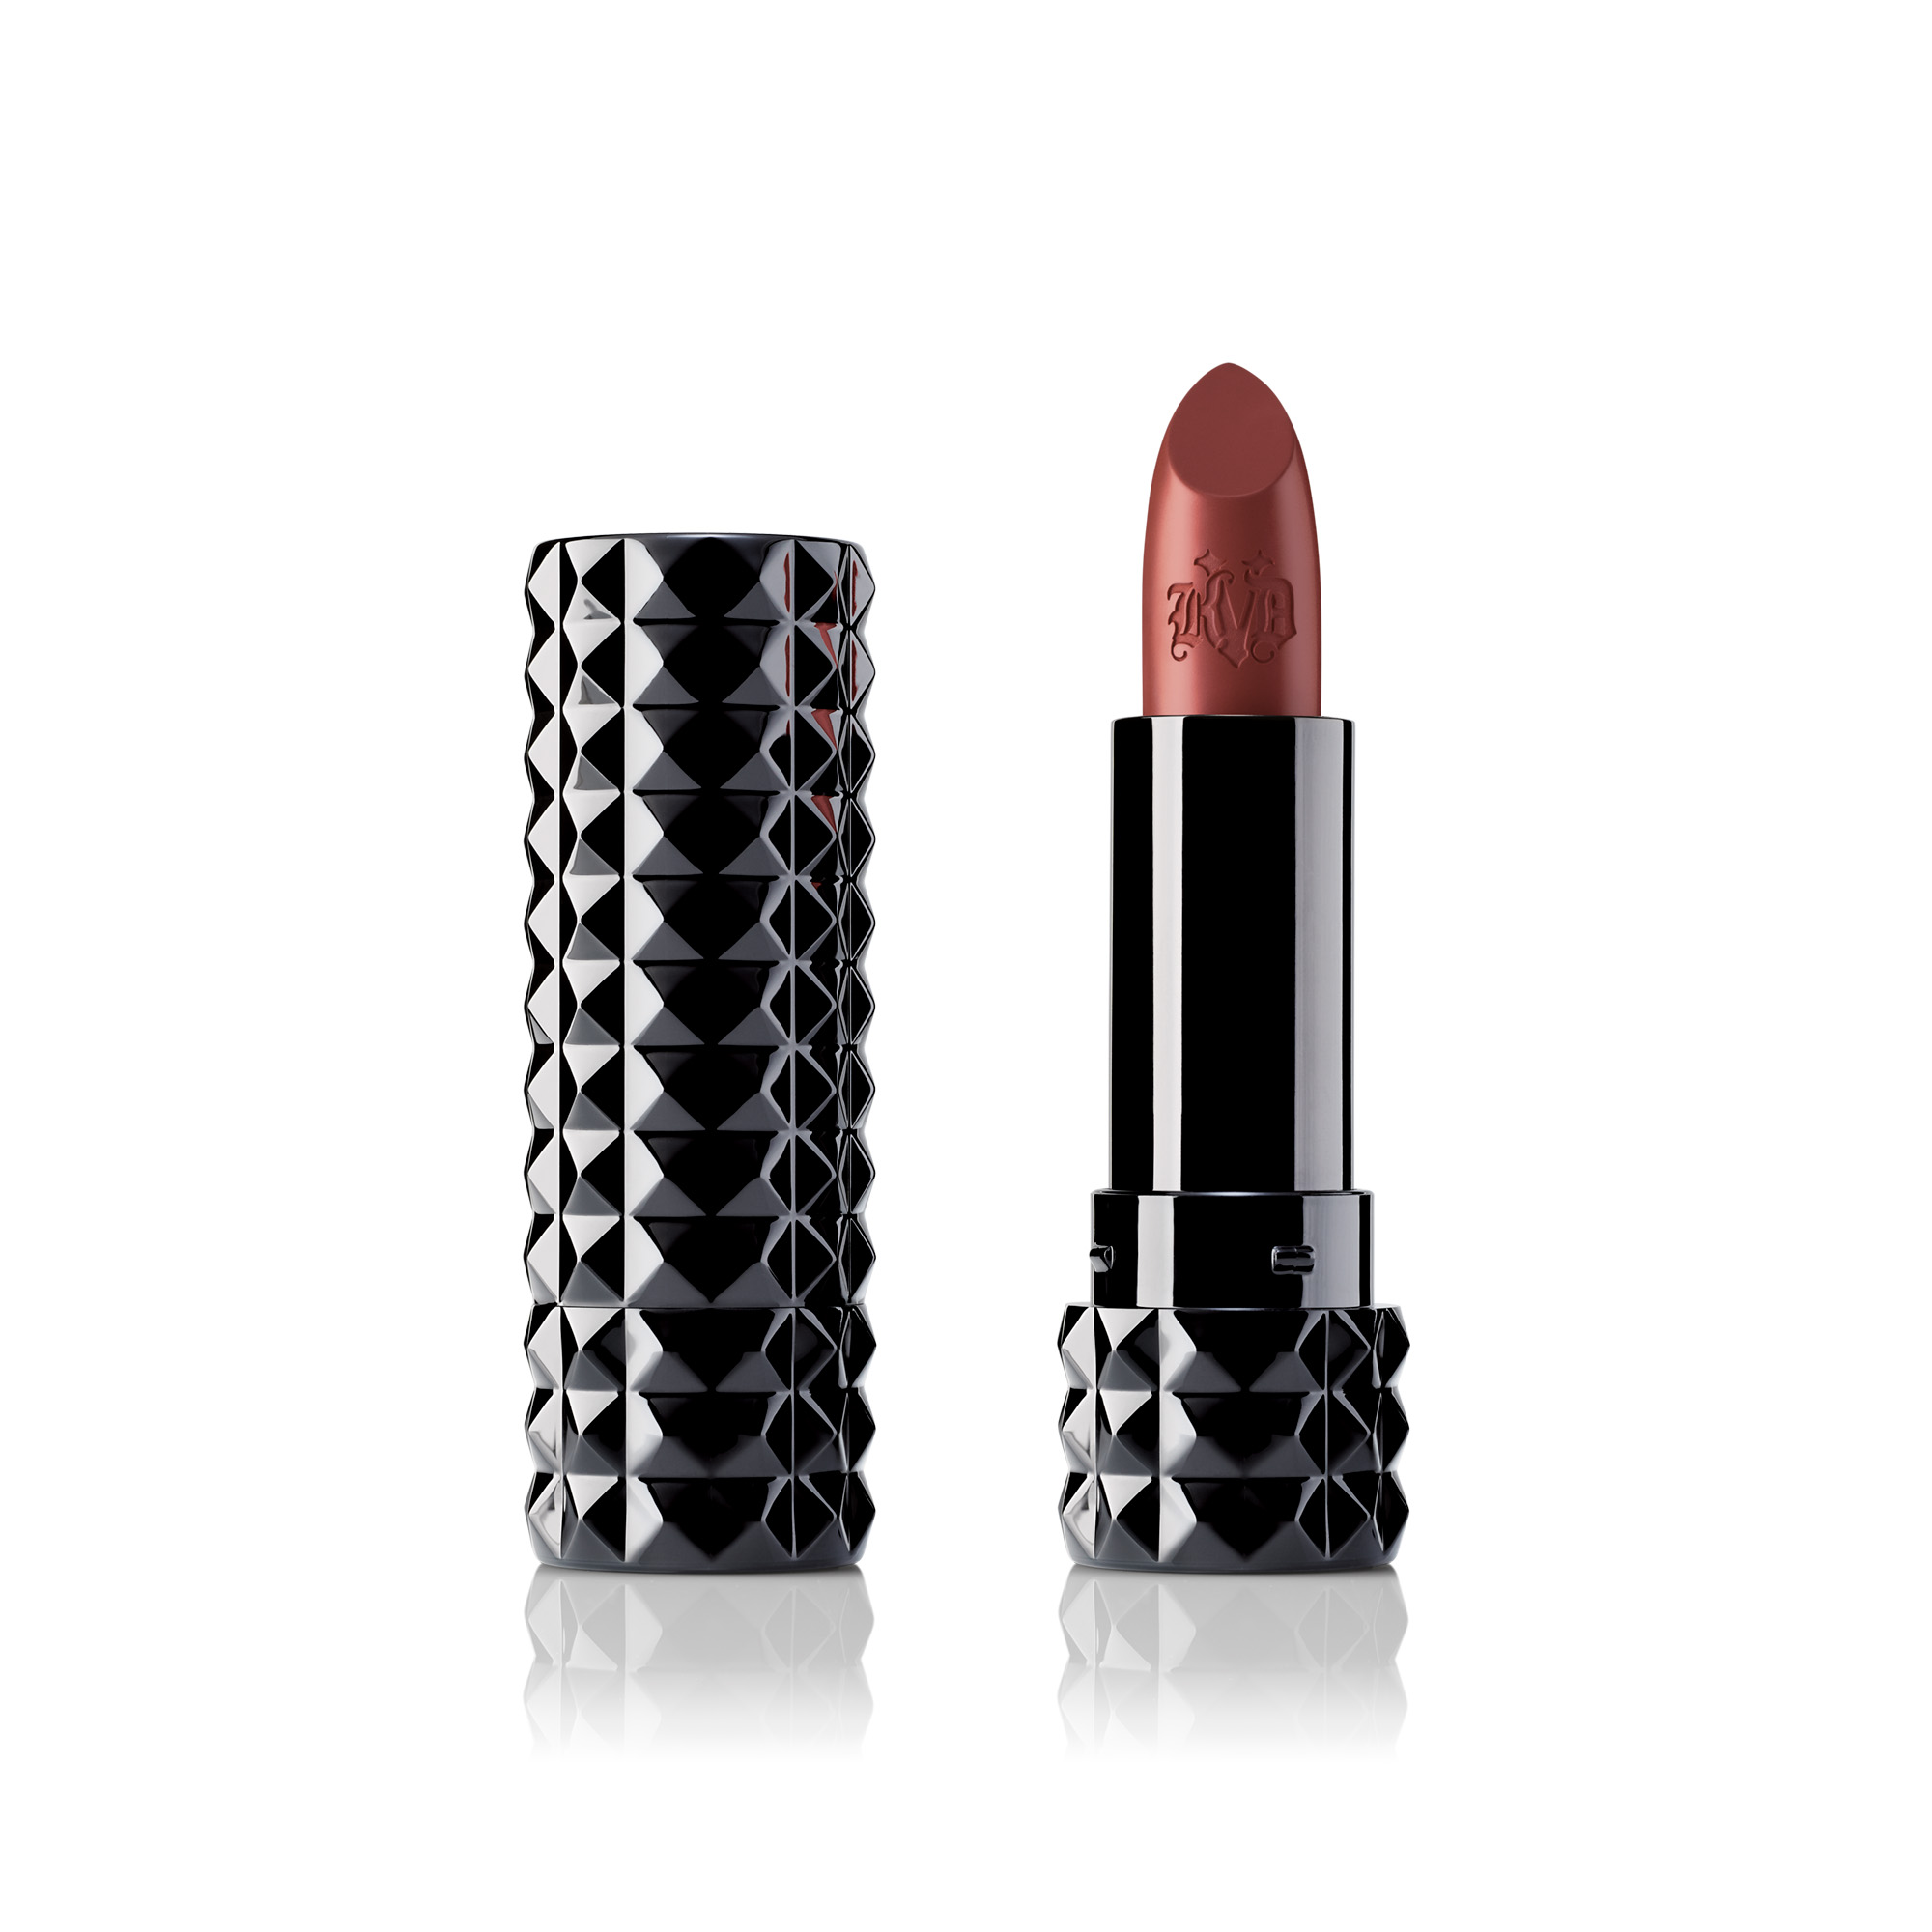 Kat Von D Beauty’s creamy, unbelievably pigmented, Studded Kiss Crème in Lolita (satin-matte chestnut rose) is featured in the 2019 Sephora Birthday Gift mini-set. Full size shown.